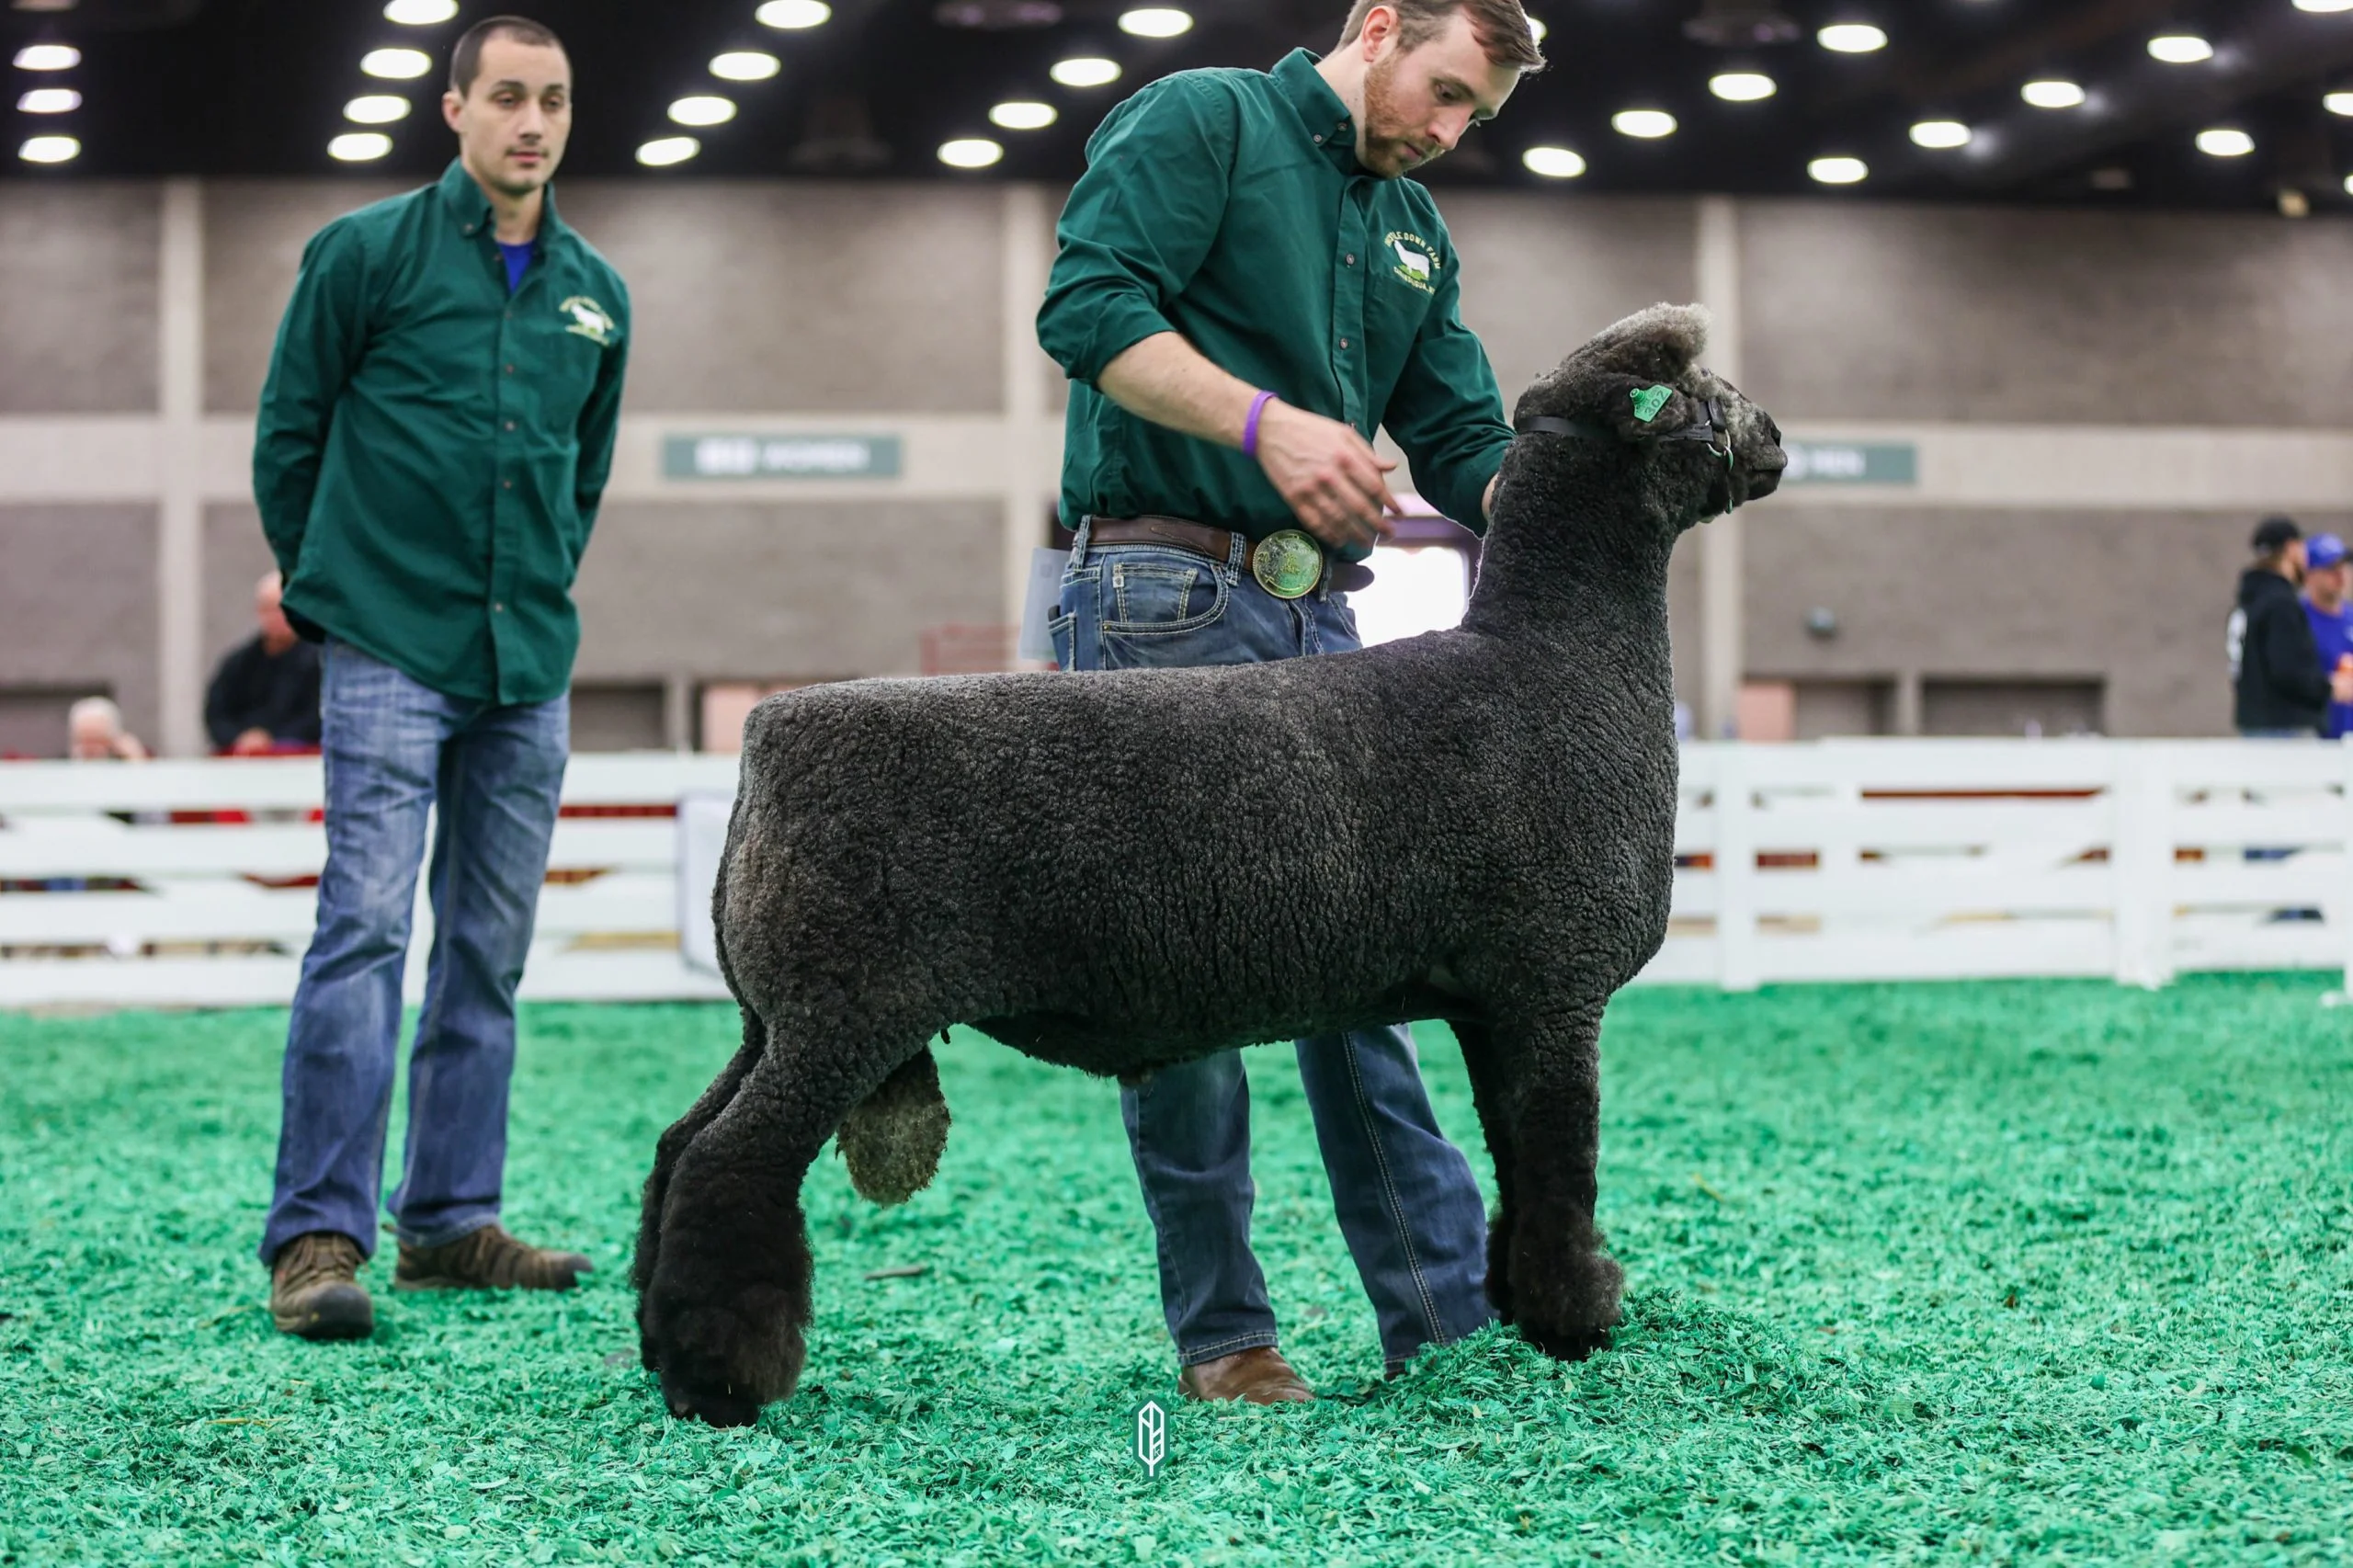 2023 National Natural Colored Romney Show at NAILE
1st place winter ram lamb exhibited by Ethan Kennedy of Thistle Down Farm